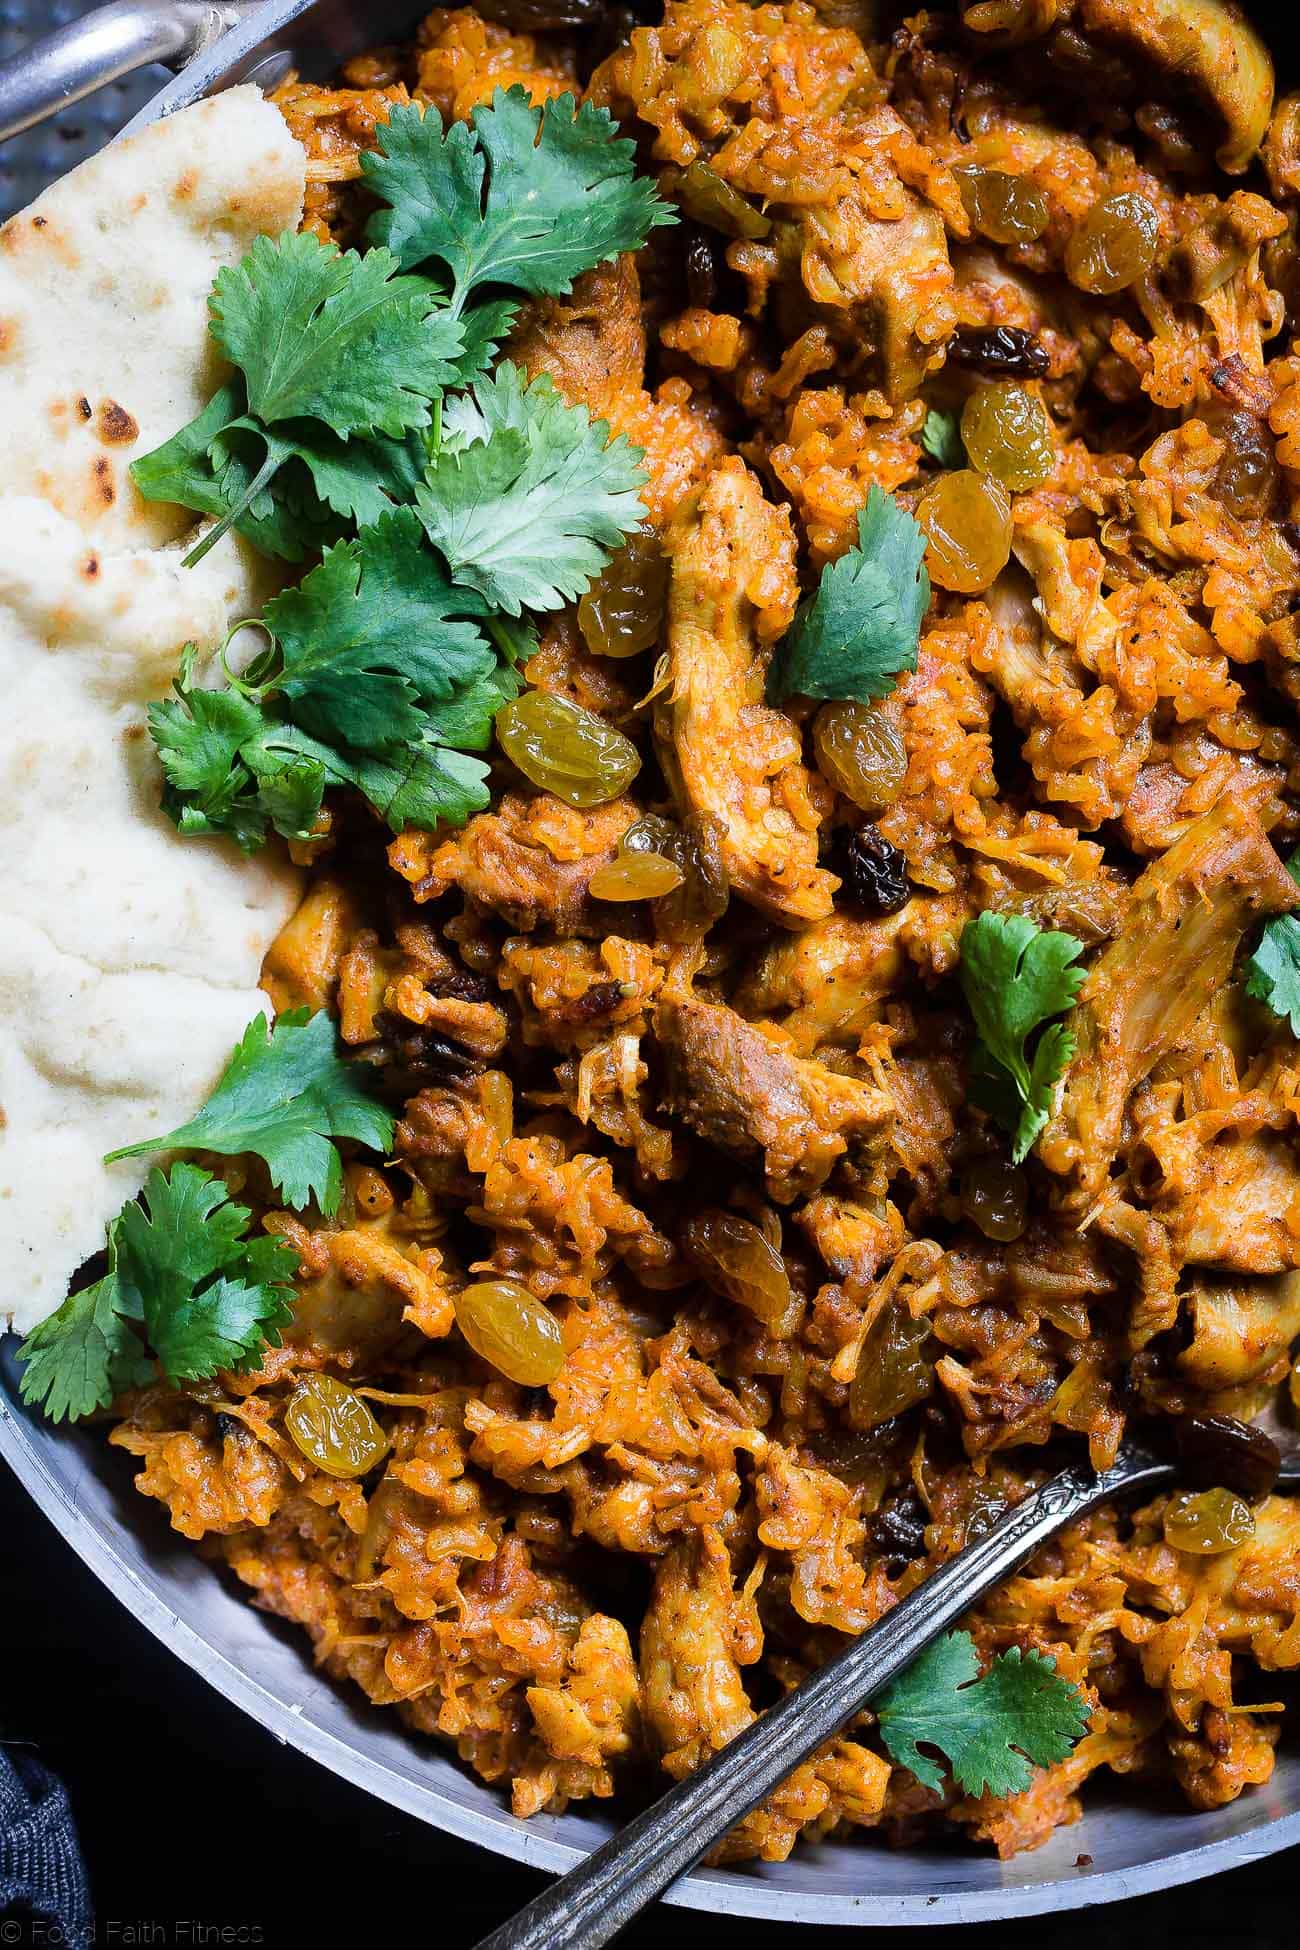 Indian Chicken Rice Casserole - This dairy and gluten free casserole is made in one pot and has delicious Indian curry flavors! It's a quick and easy, healthy weeknight meal that freezes well and makes great leftovers! | Foodfaithfitness.com | @FoodFaithFit